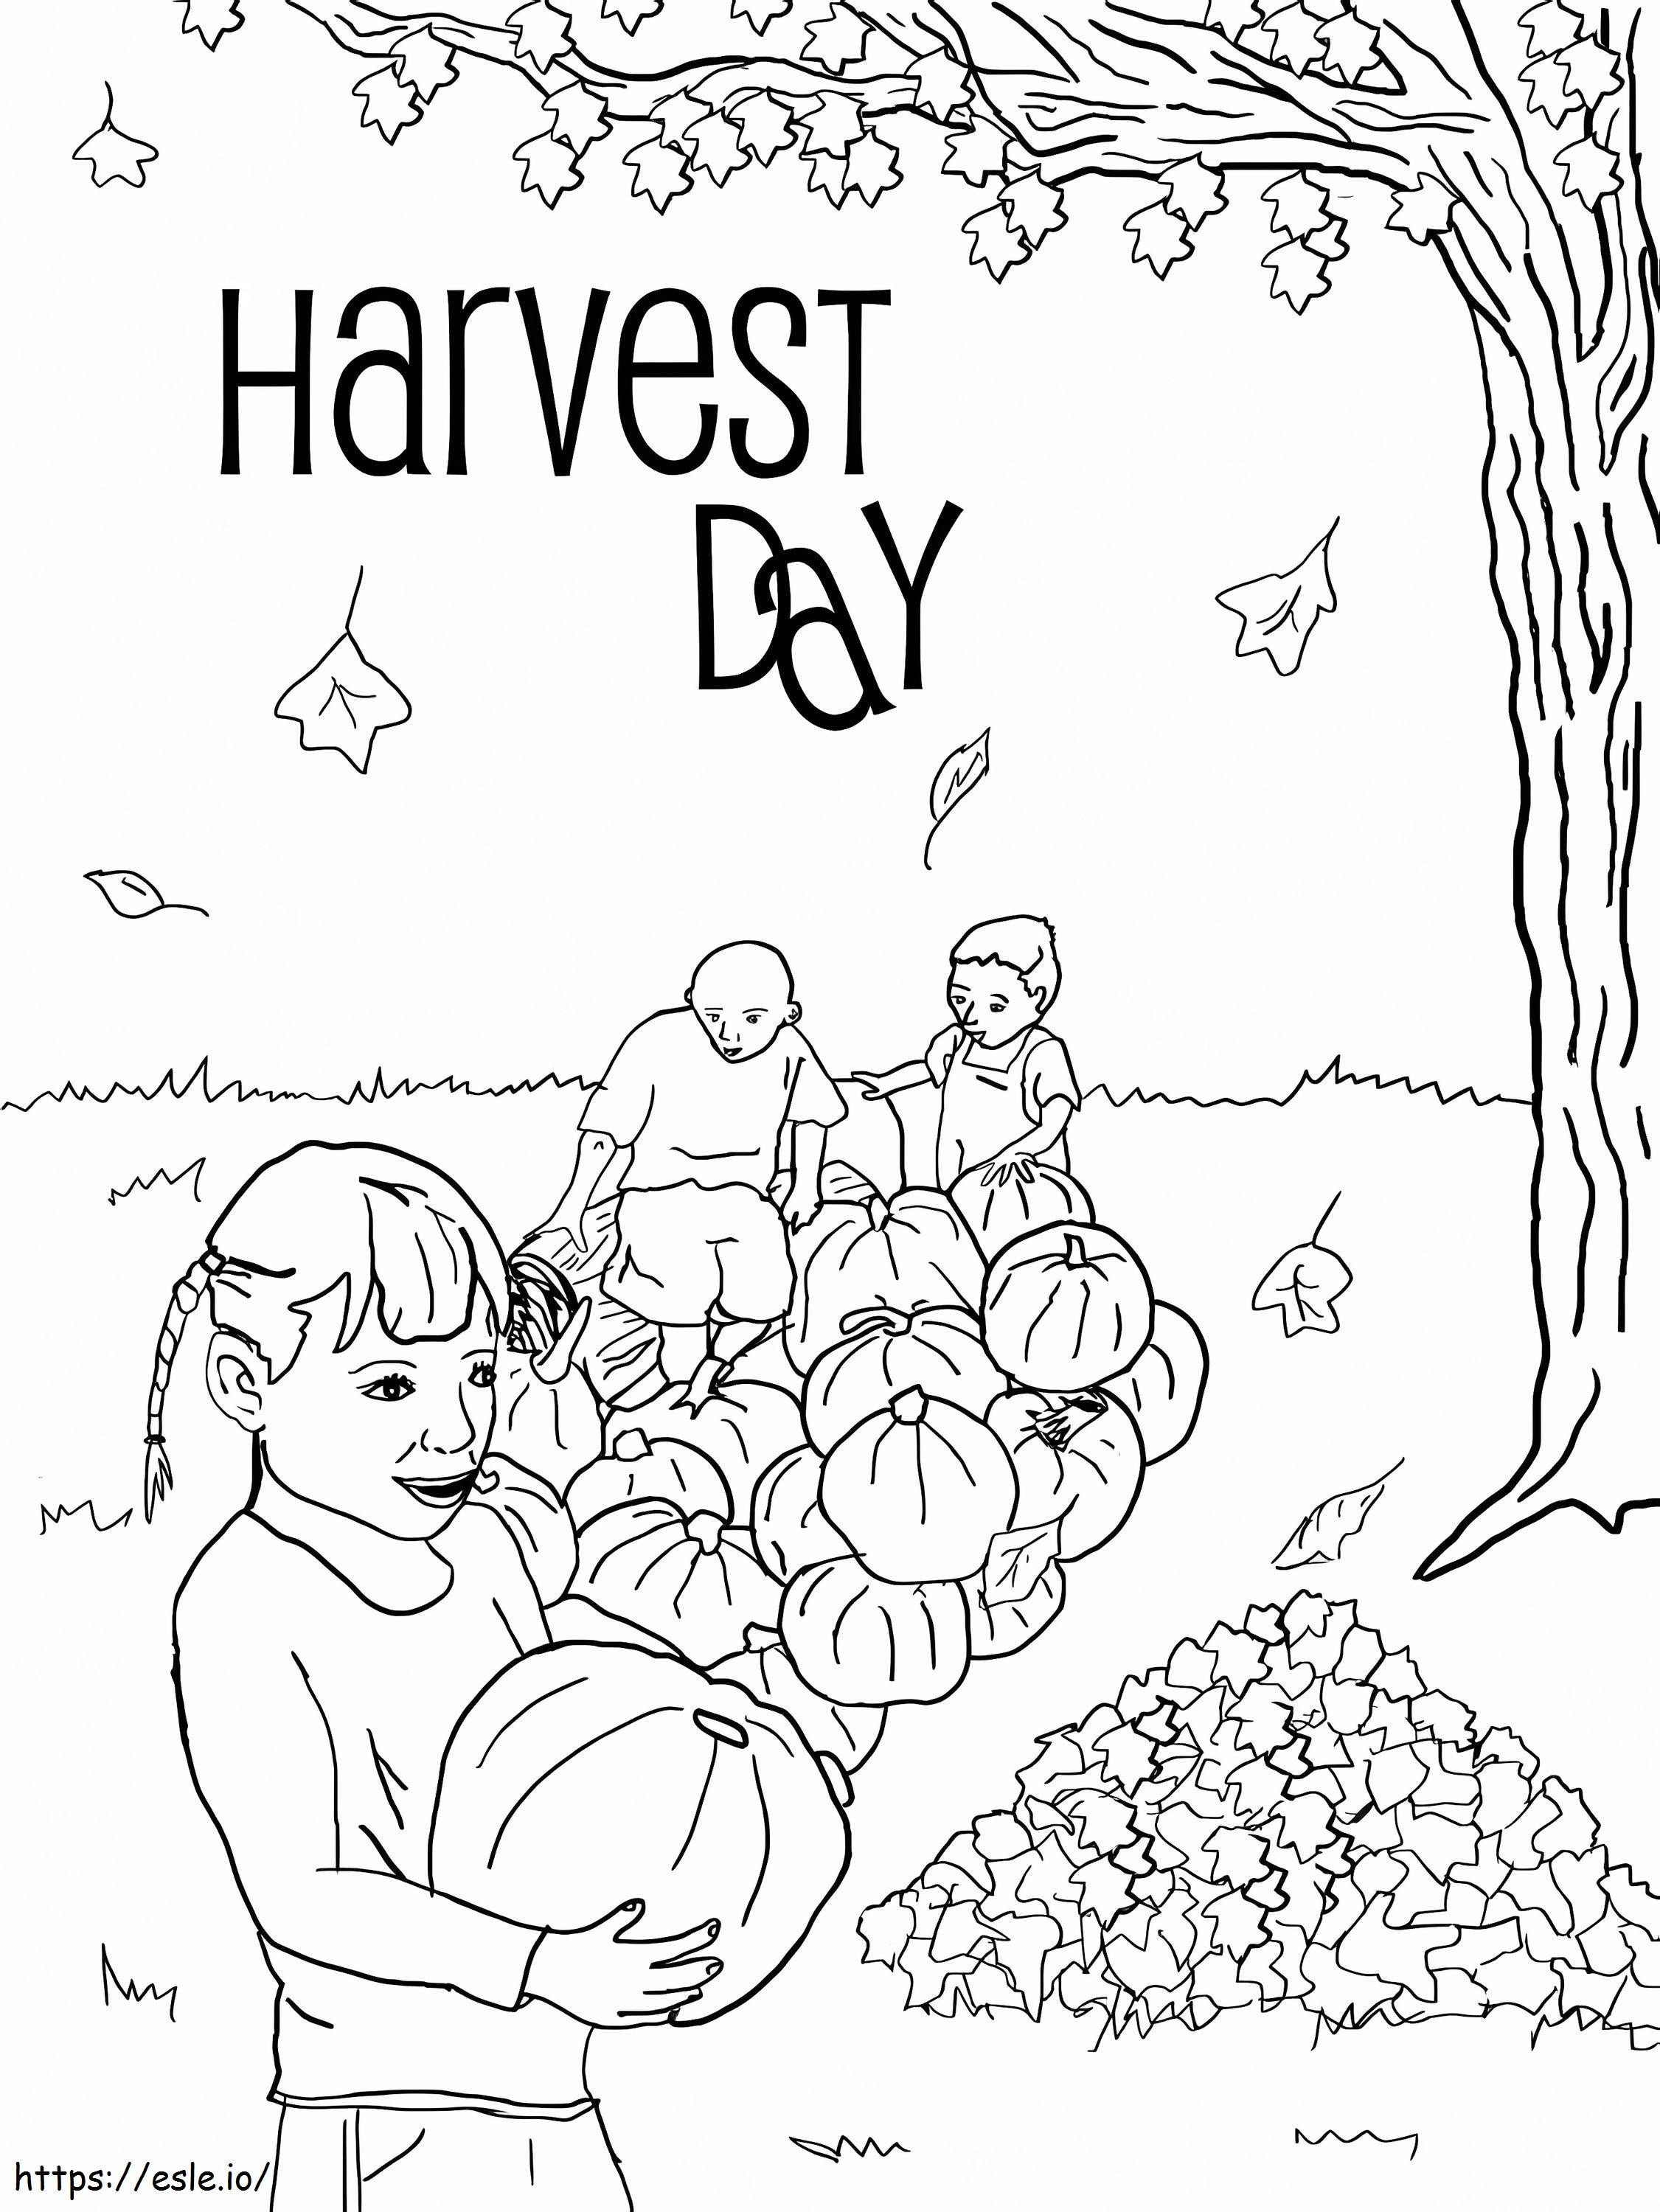 Harvest Day coloring page